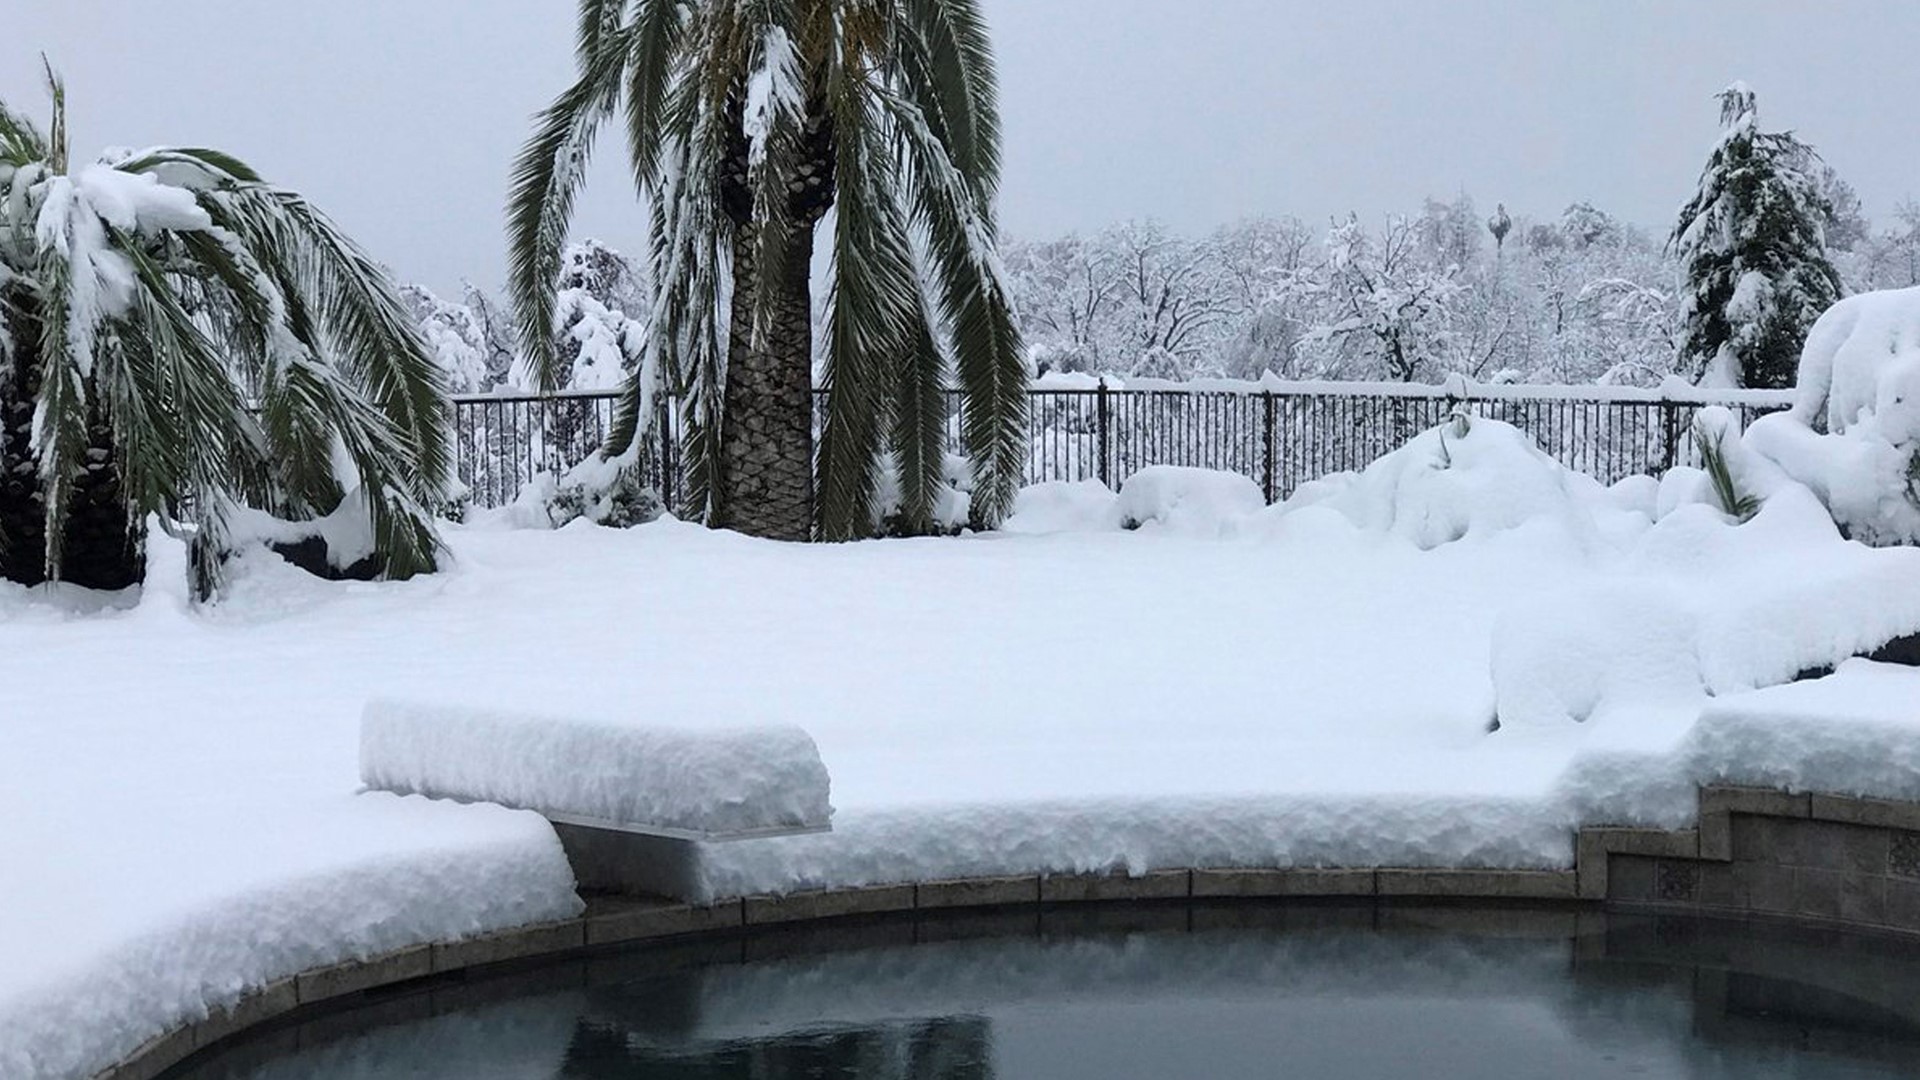 More rain and snow was dumped across Northern California on Valentine's Day. That and more on your Daily Blend of weather, traffic and headlines.